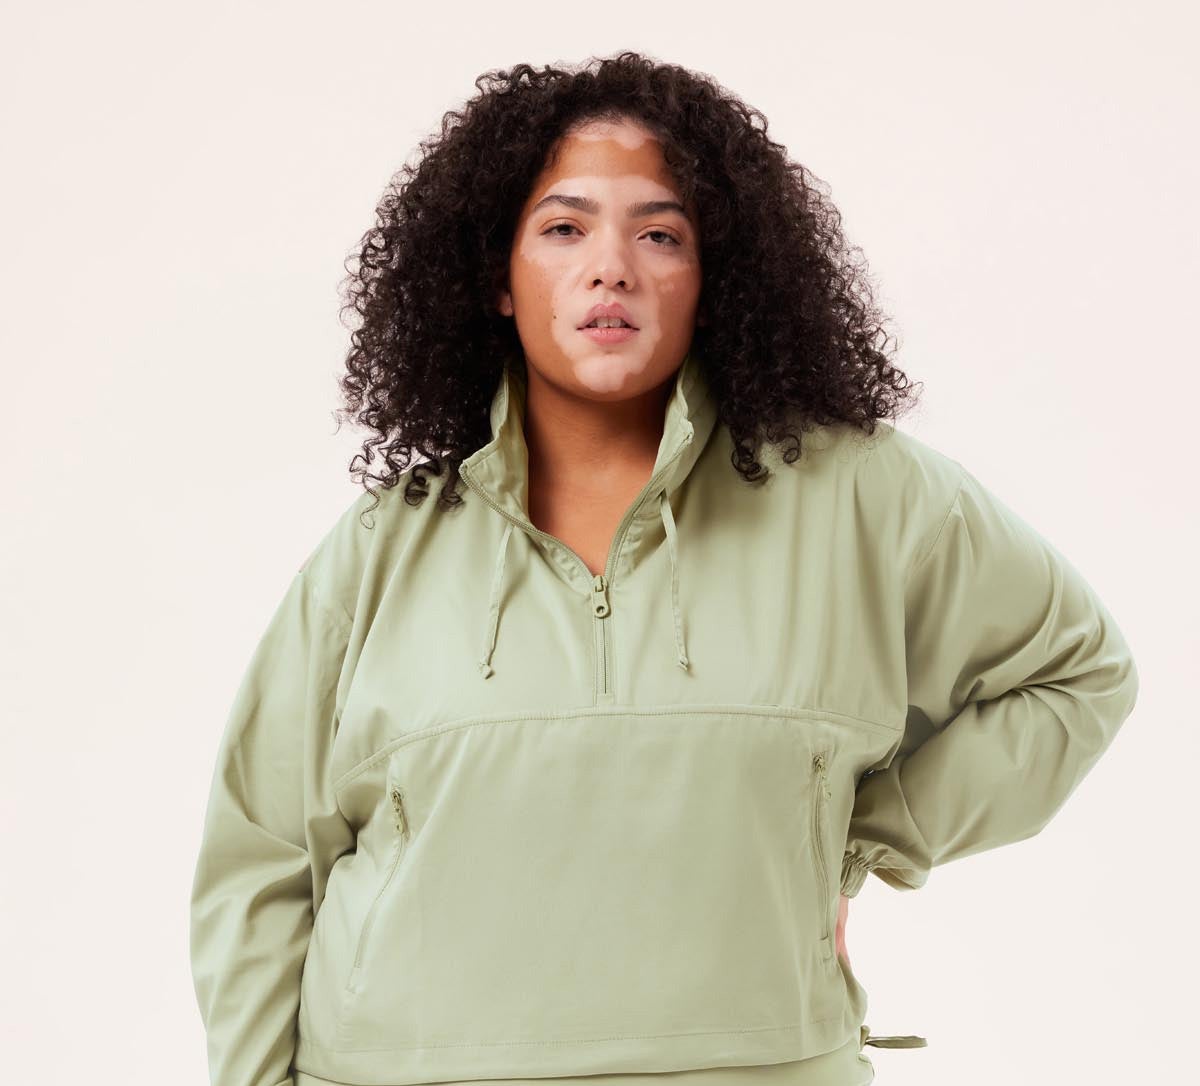 Girlfriend Collective Launched Size-Inclusive Workout Clothes in